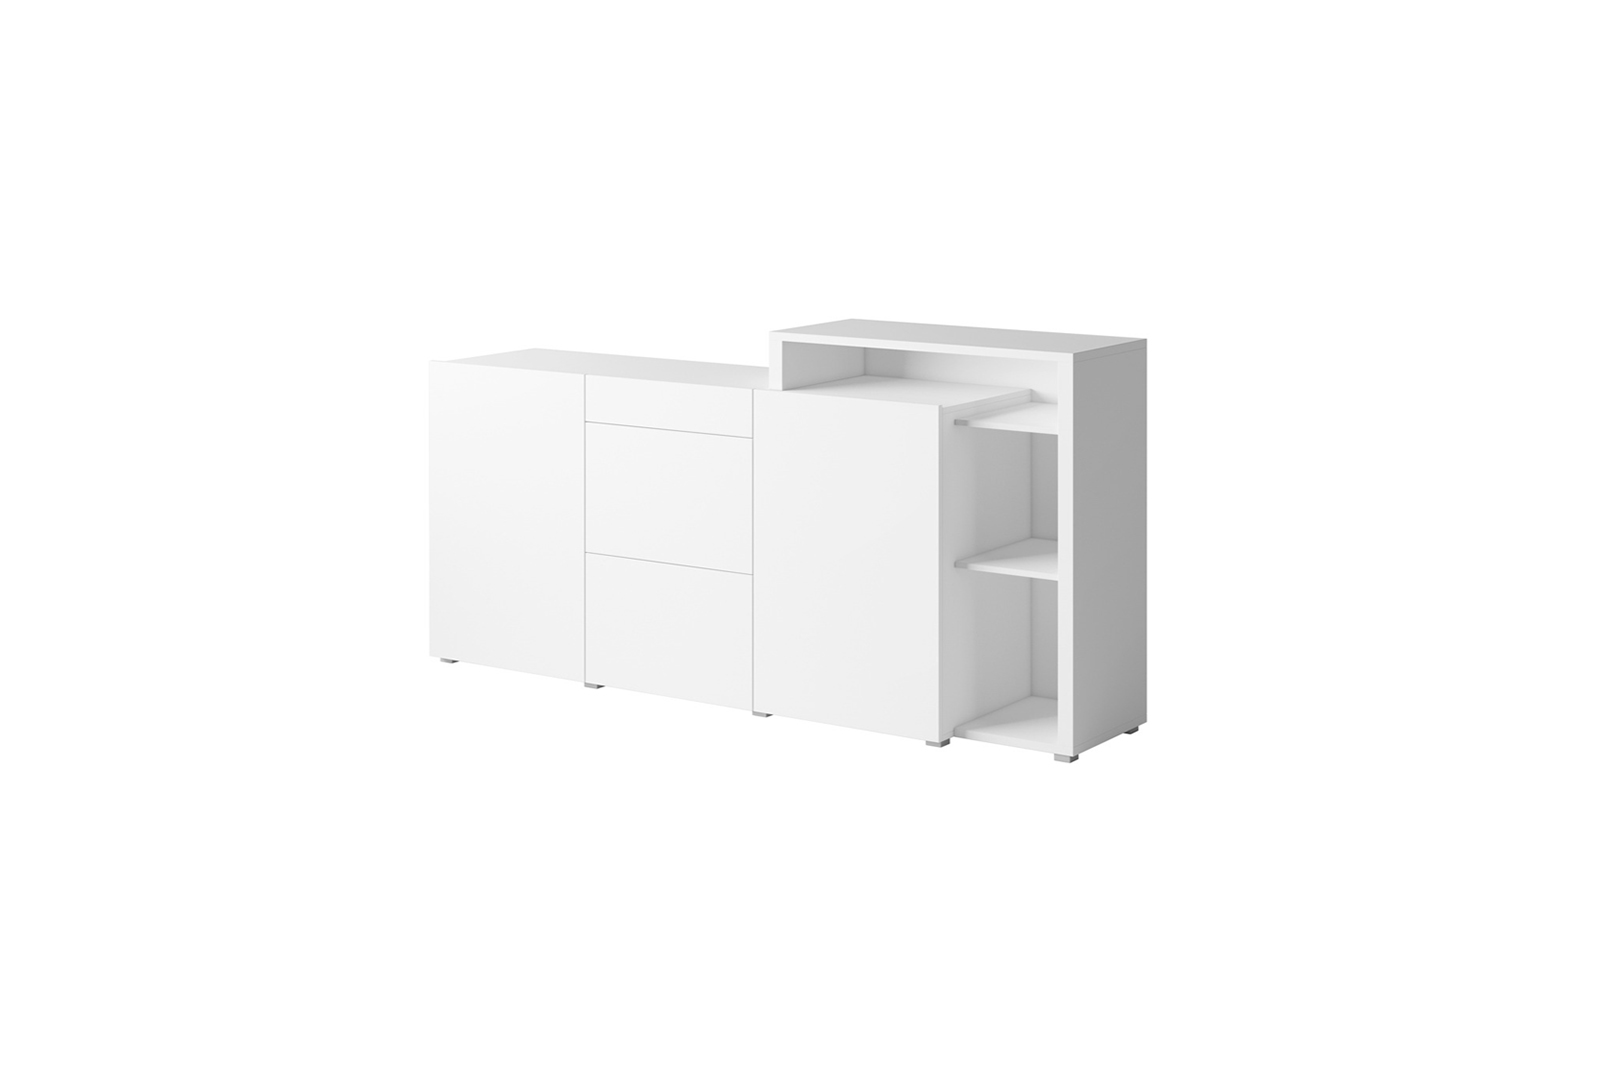 VENTO CHEST OF DRAWERS TYPE 25